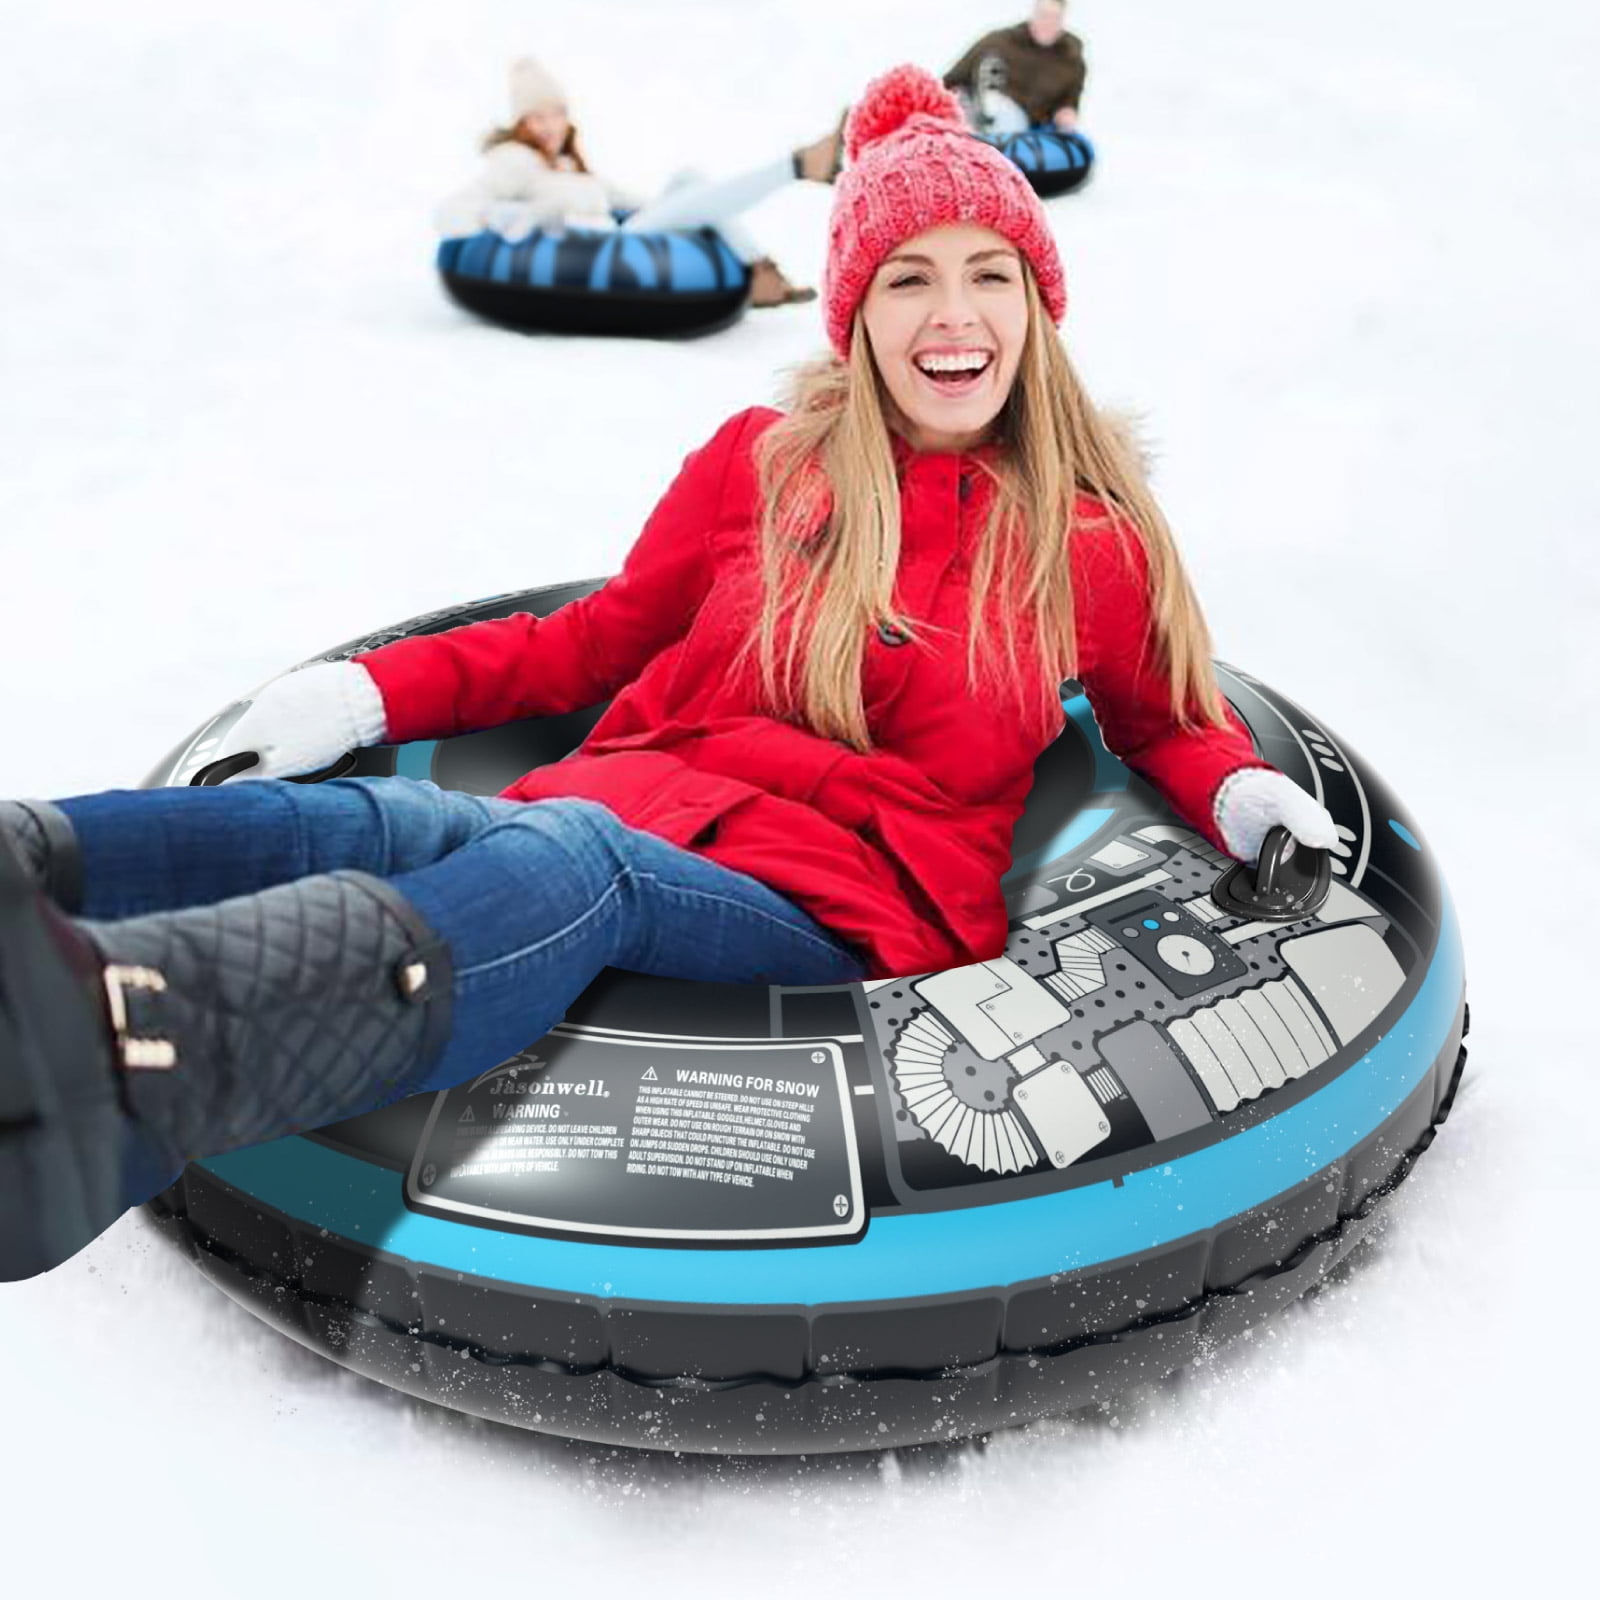 Heavy Duty Winter Toys for Outdoor Sledding Snow Tube Sports with Handles Snow Tube 47 in Inflatable Snow Sled Toboggan Snow Toys for Kids and Adults 